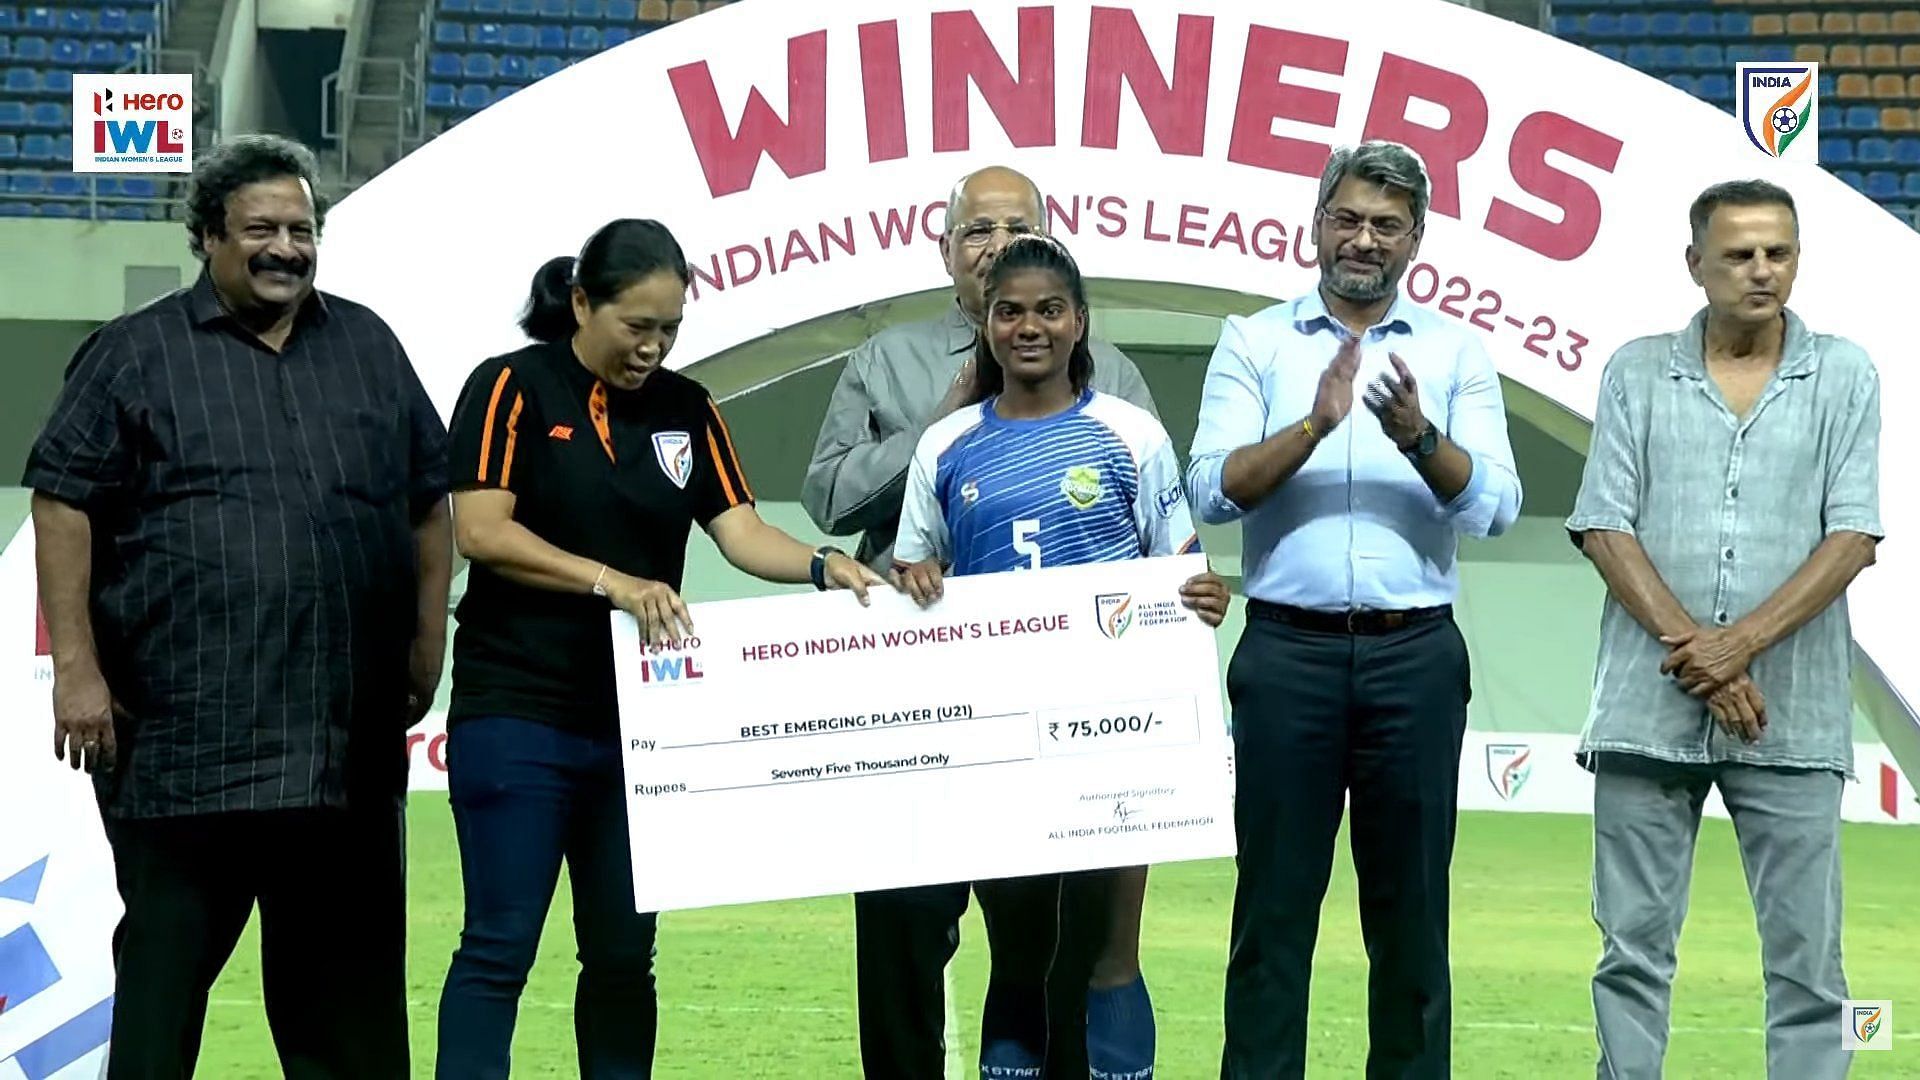 Astam awarded the Best Emerging Player of the 2022-23 IWL season.